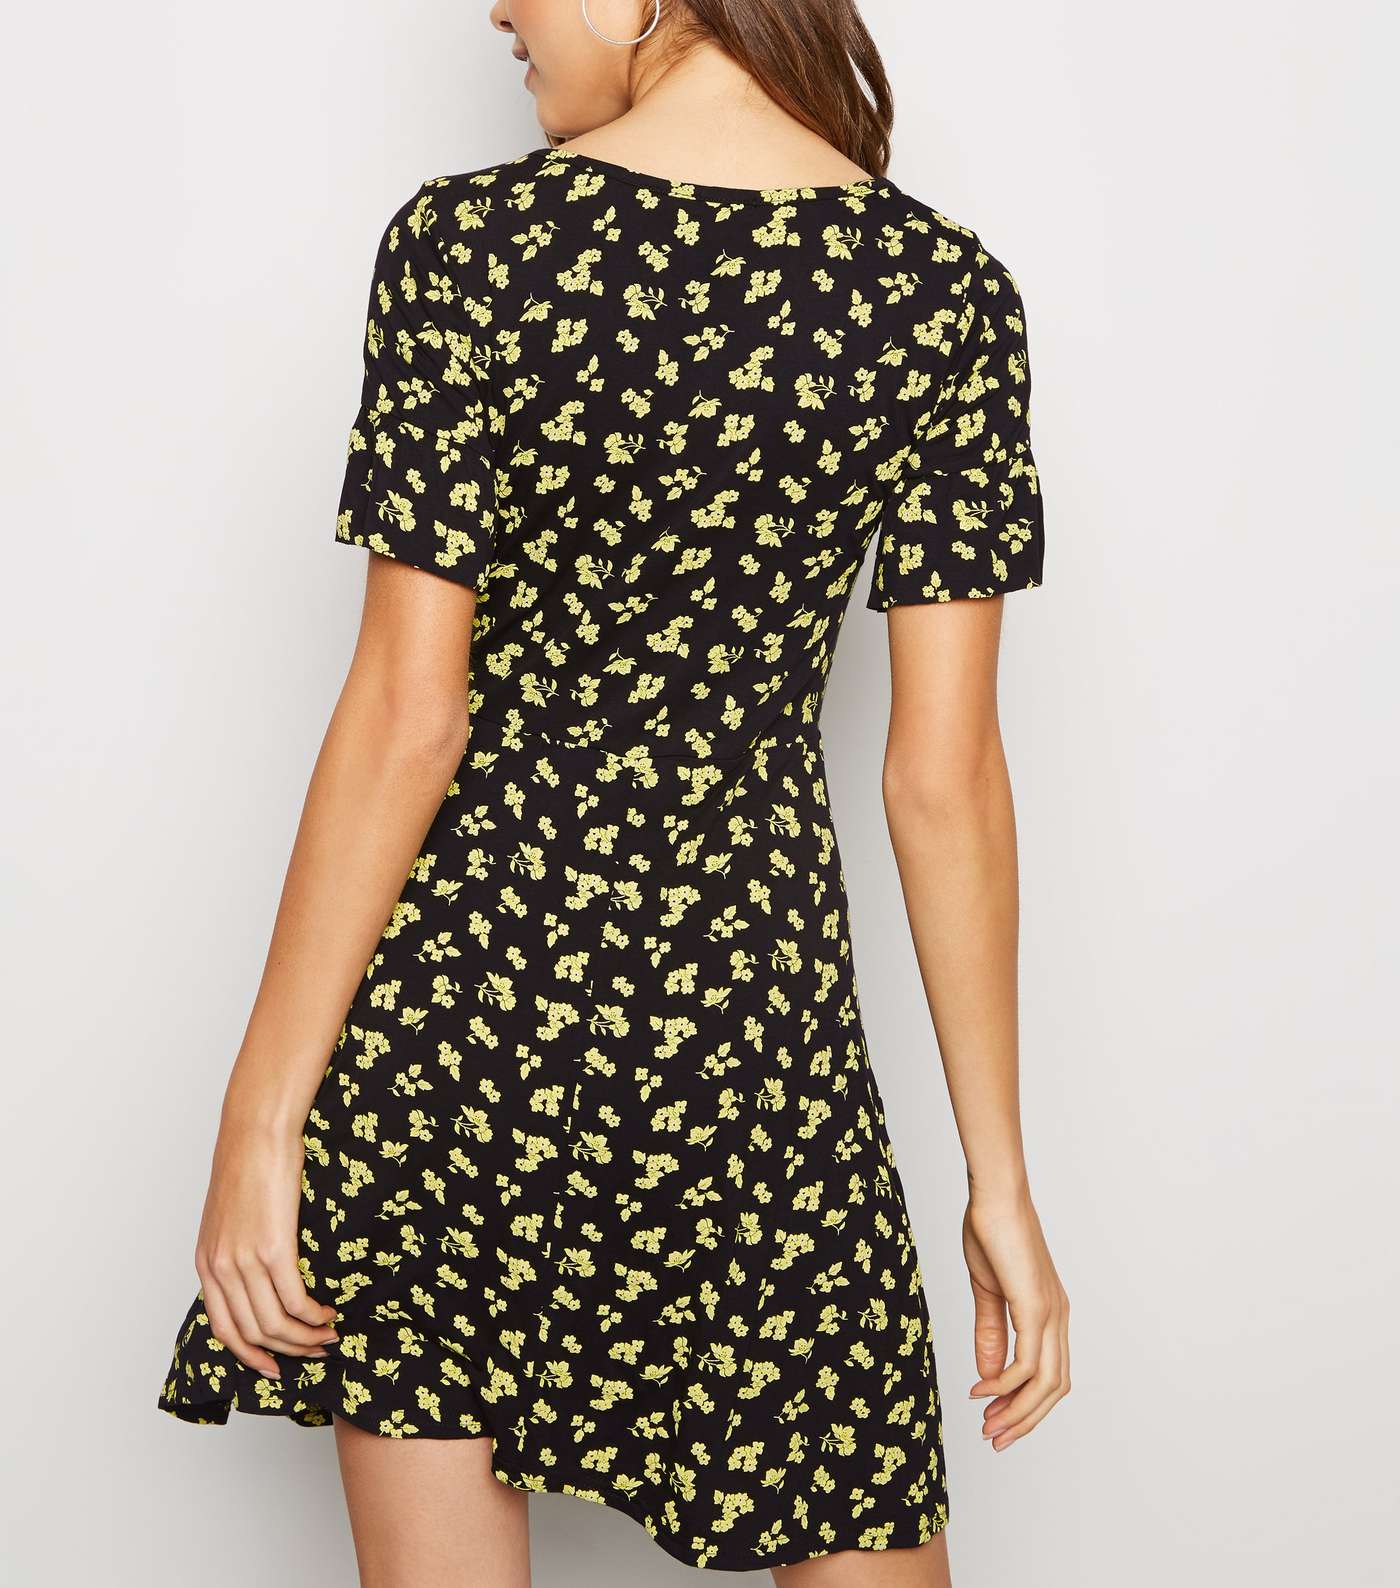 Cameo Rose Black Ditsy Floral Ruffle Sleeve Dress Image 3